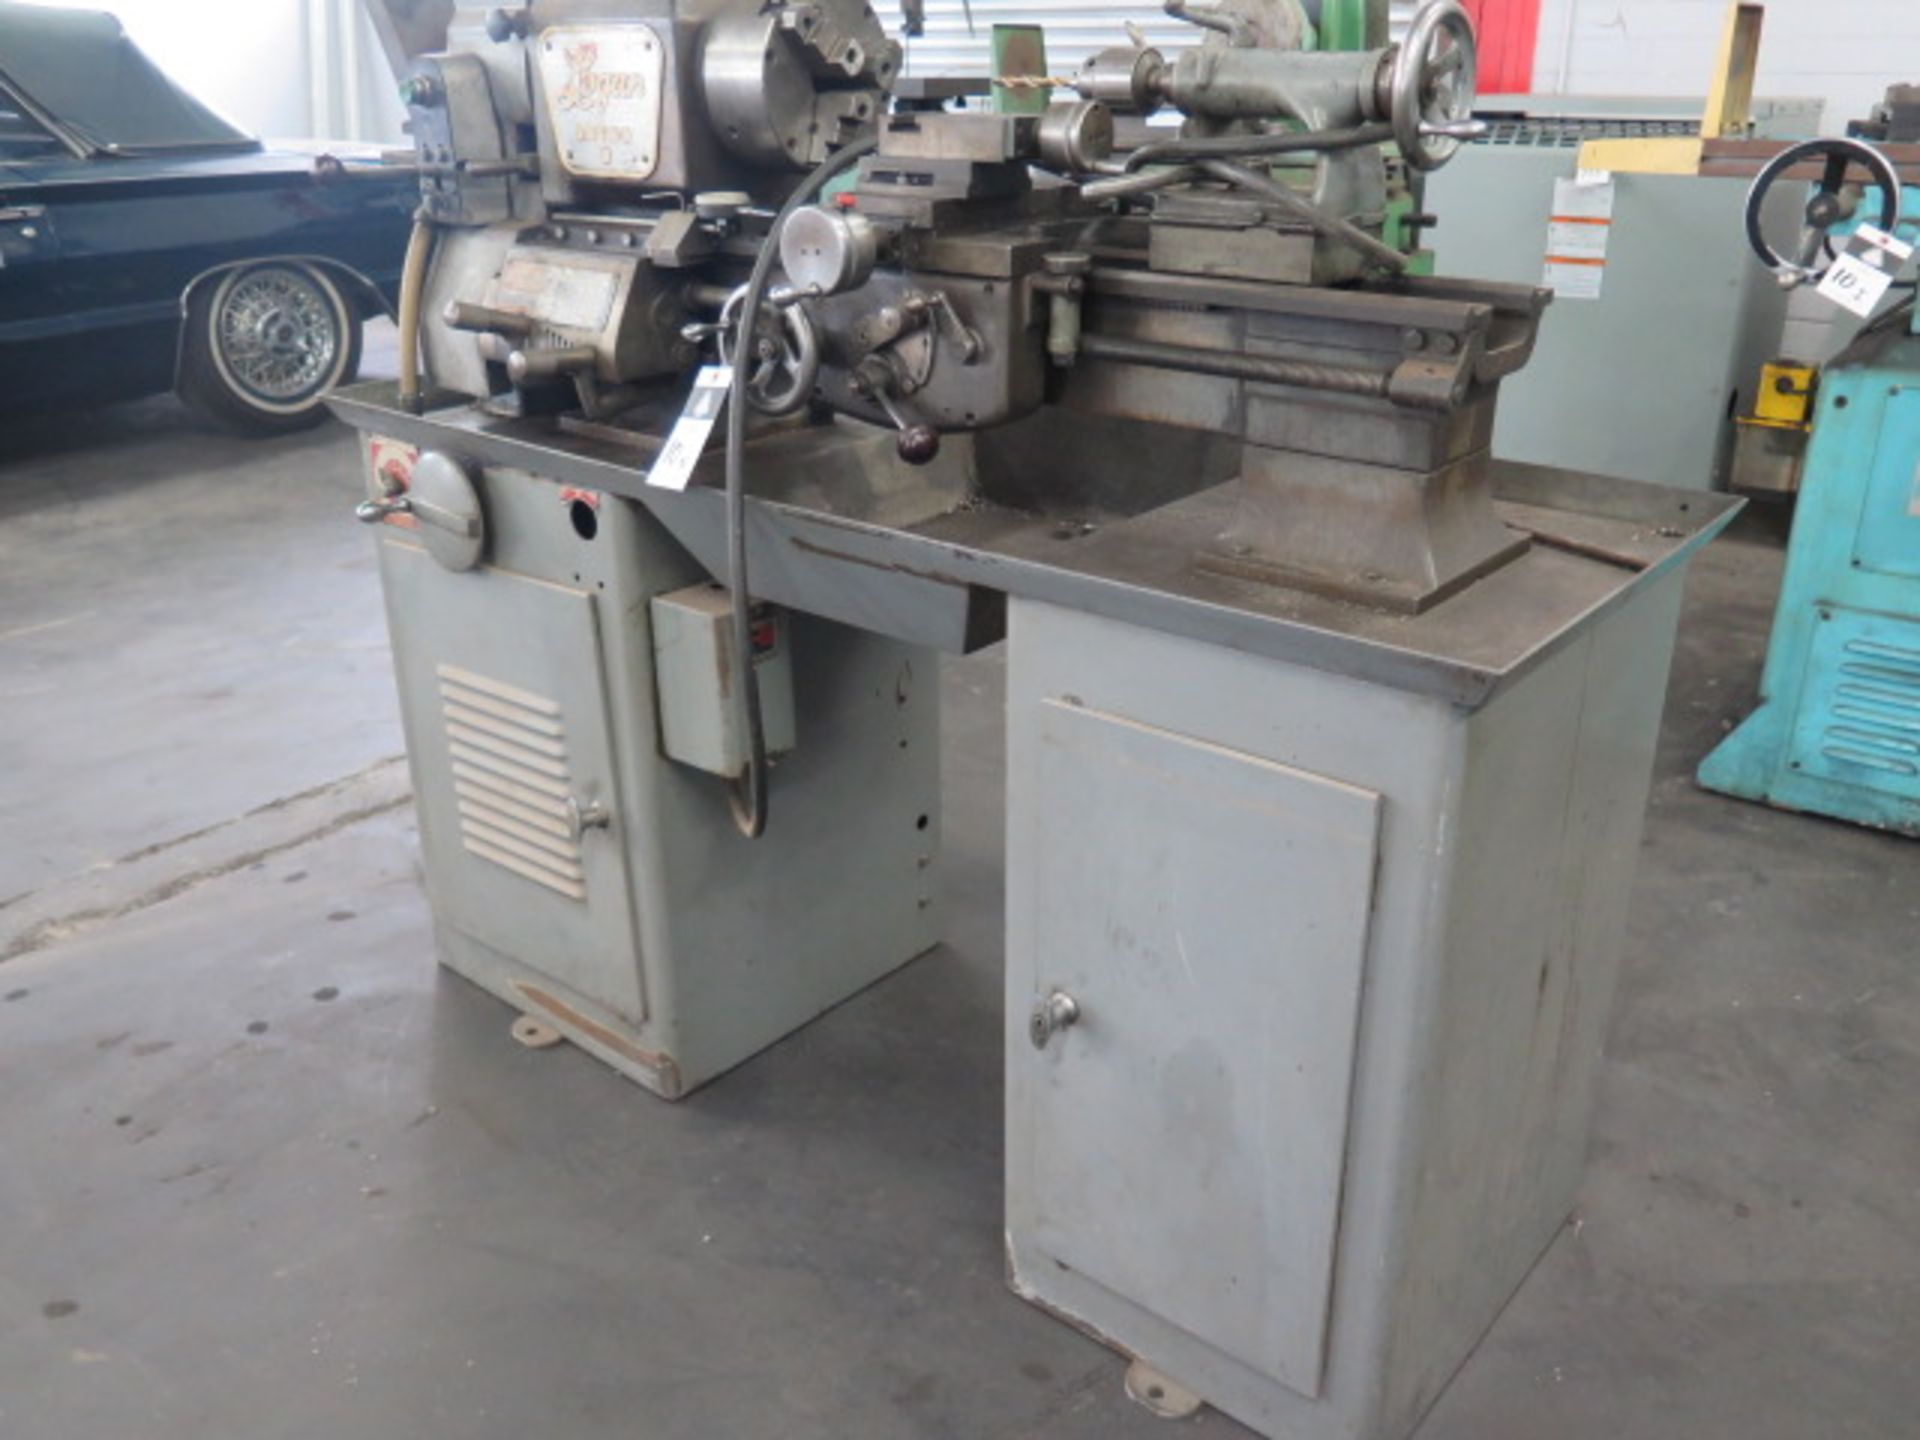 Logan mdl. 2535-2VH 12" x 24" Lathe s/n 83331 w/ 55-2000 Dial RPM, Inch Threading, Tailstock, 7 1/2" - Image 3 of 8